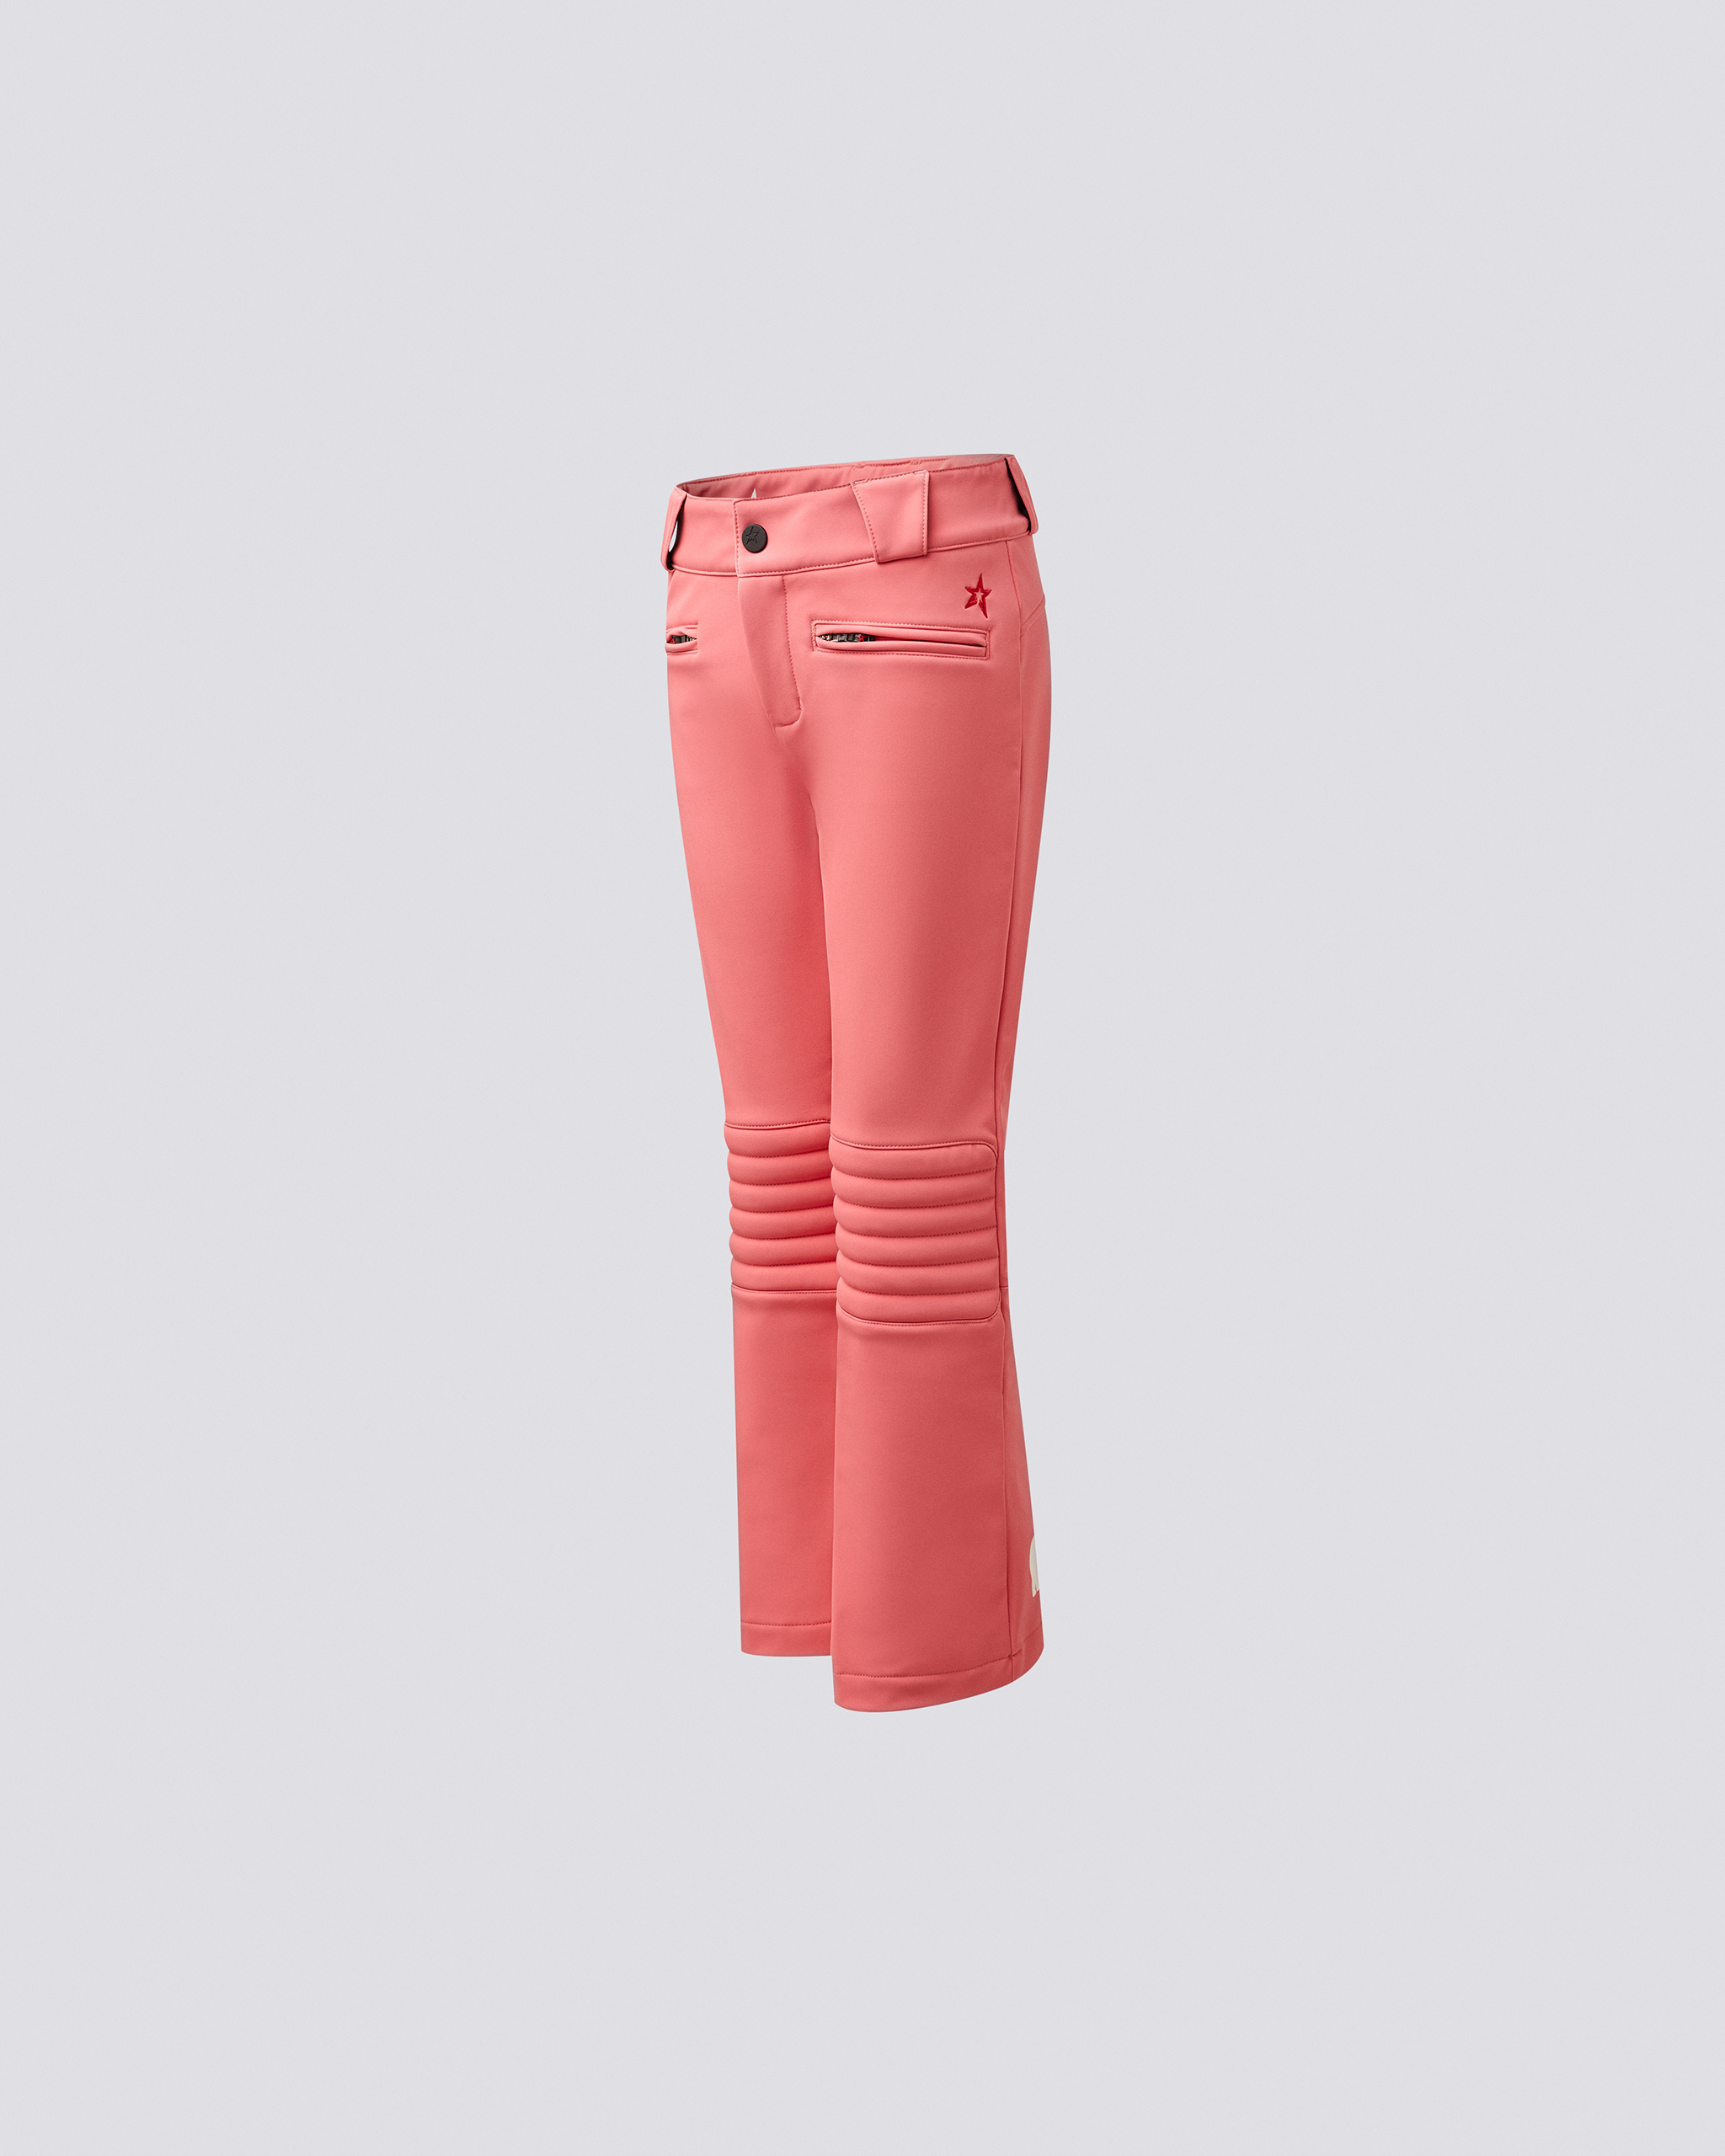 Perfect Moment Ski Pants - Houndstooth Aurora High Waist Flare Pant Pink  Size XS - $280 (42% Off Retail) - From Belle